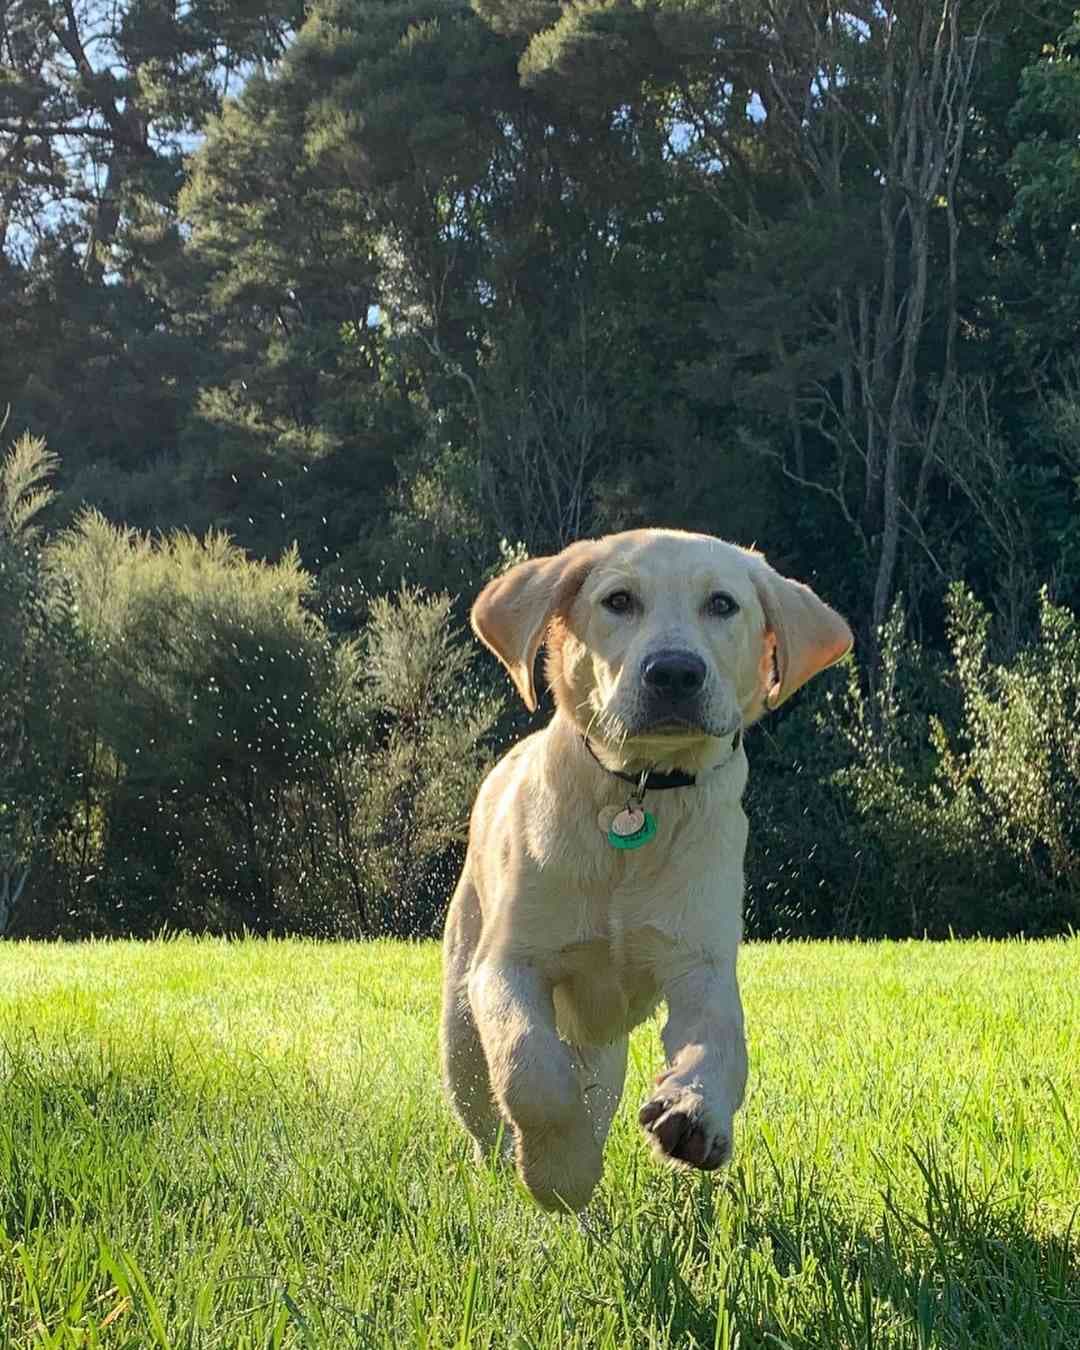 Gino is a yellow Labrador puppy running through a field on a sunny day.